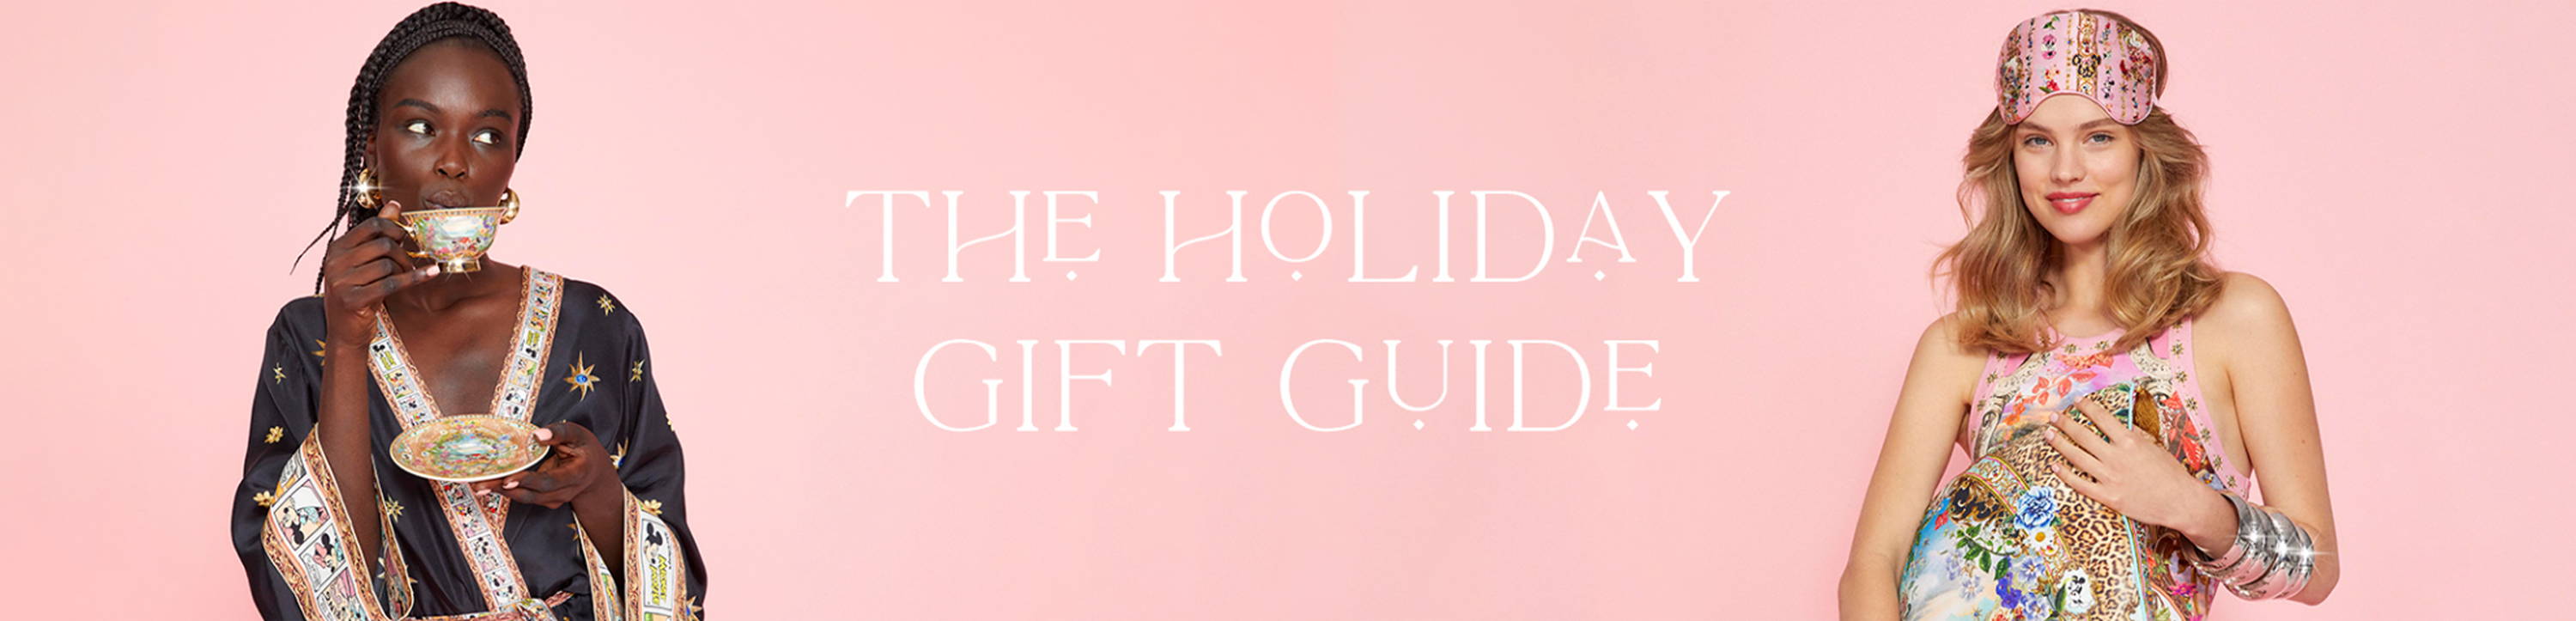 The holiday gift guide